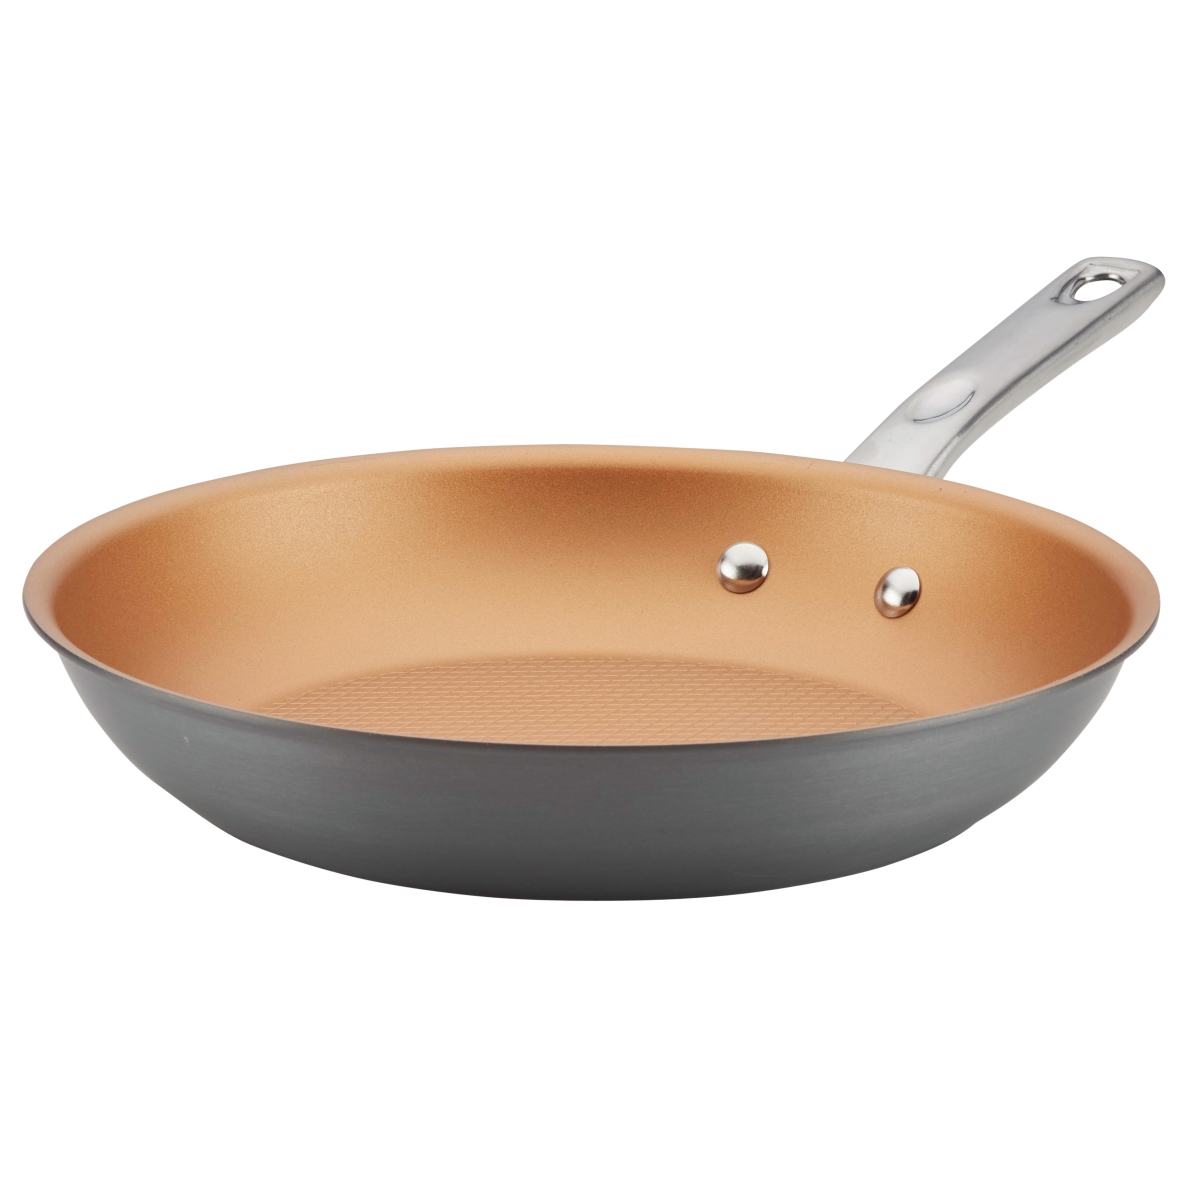 80138 Hard-anodized Nonstick Skillet, 11.5 In. - Gray